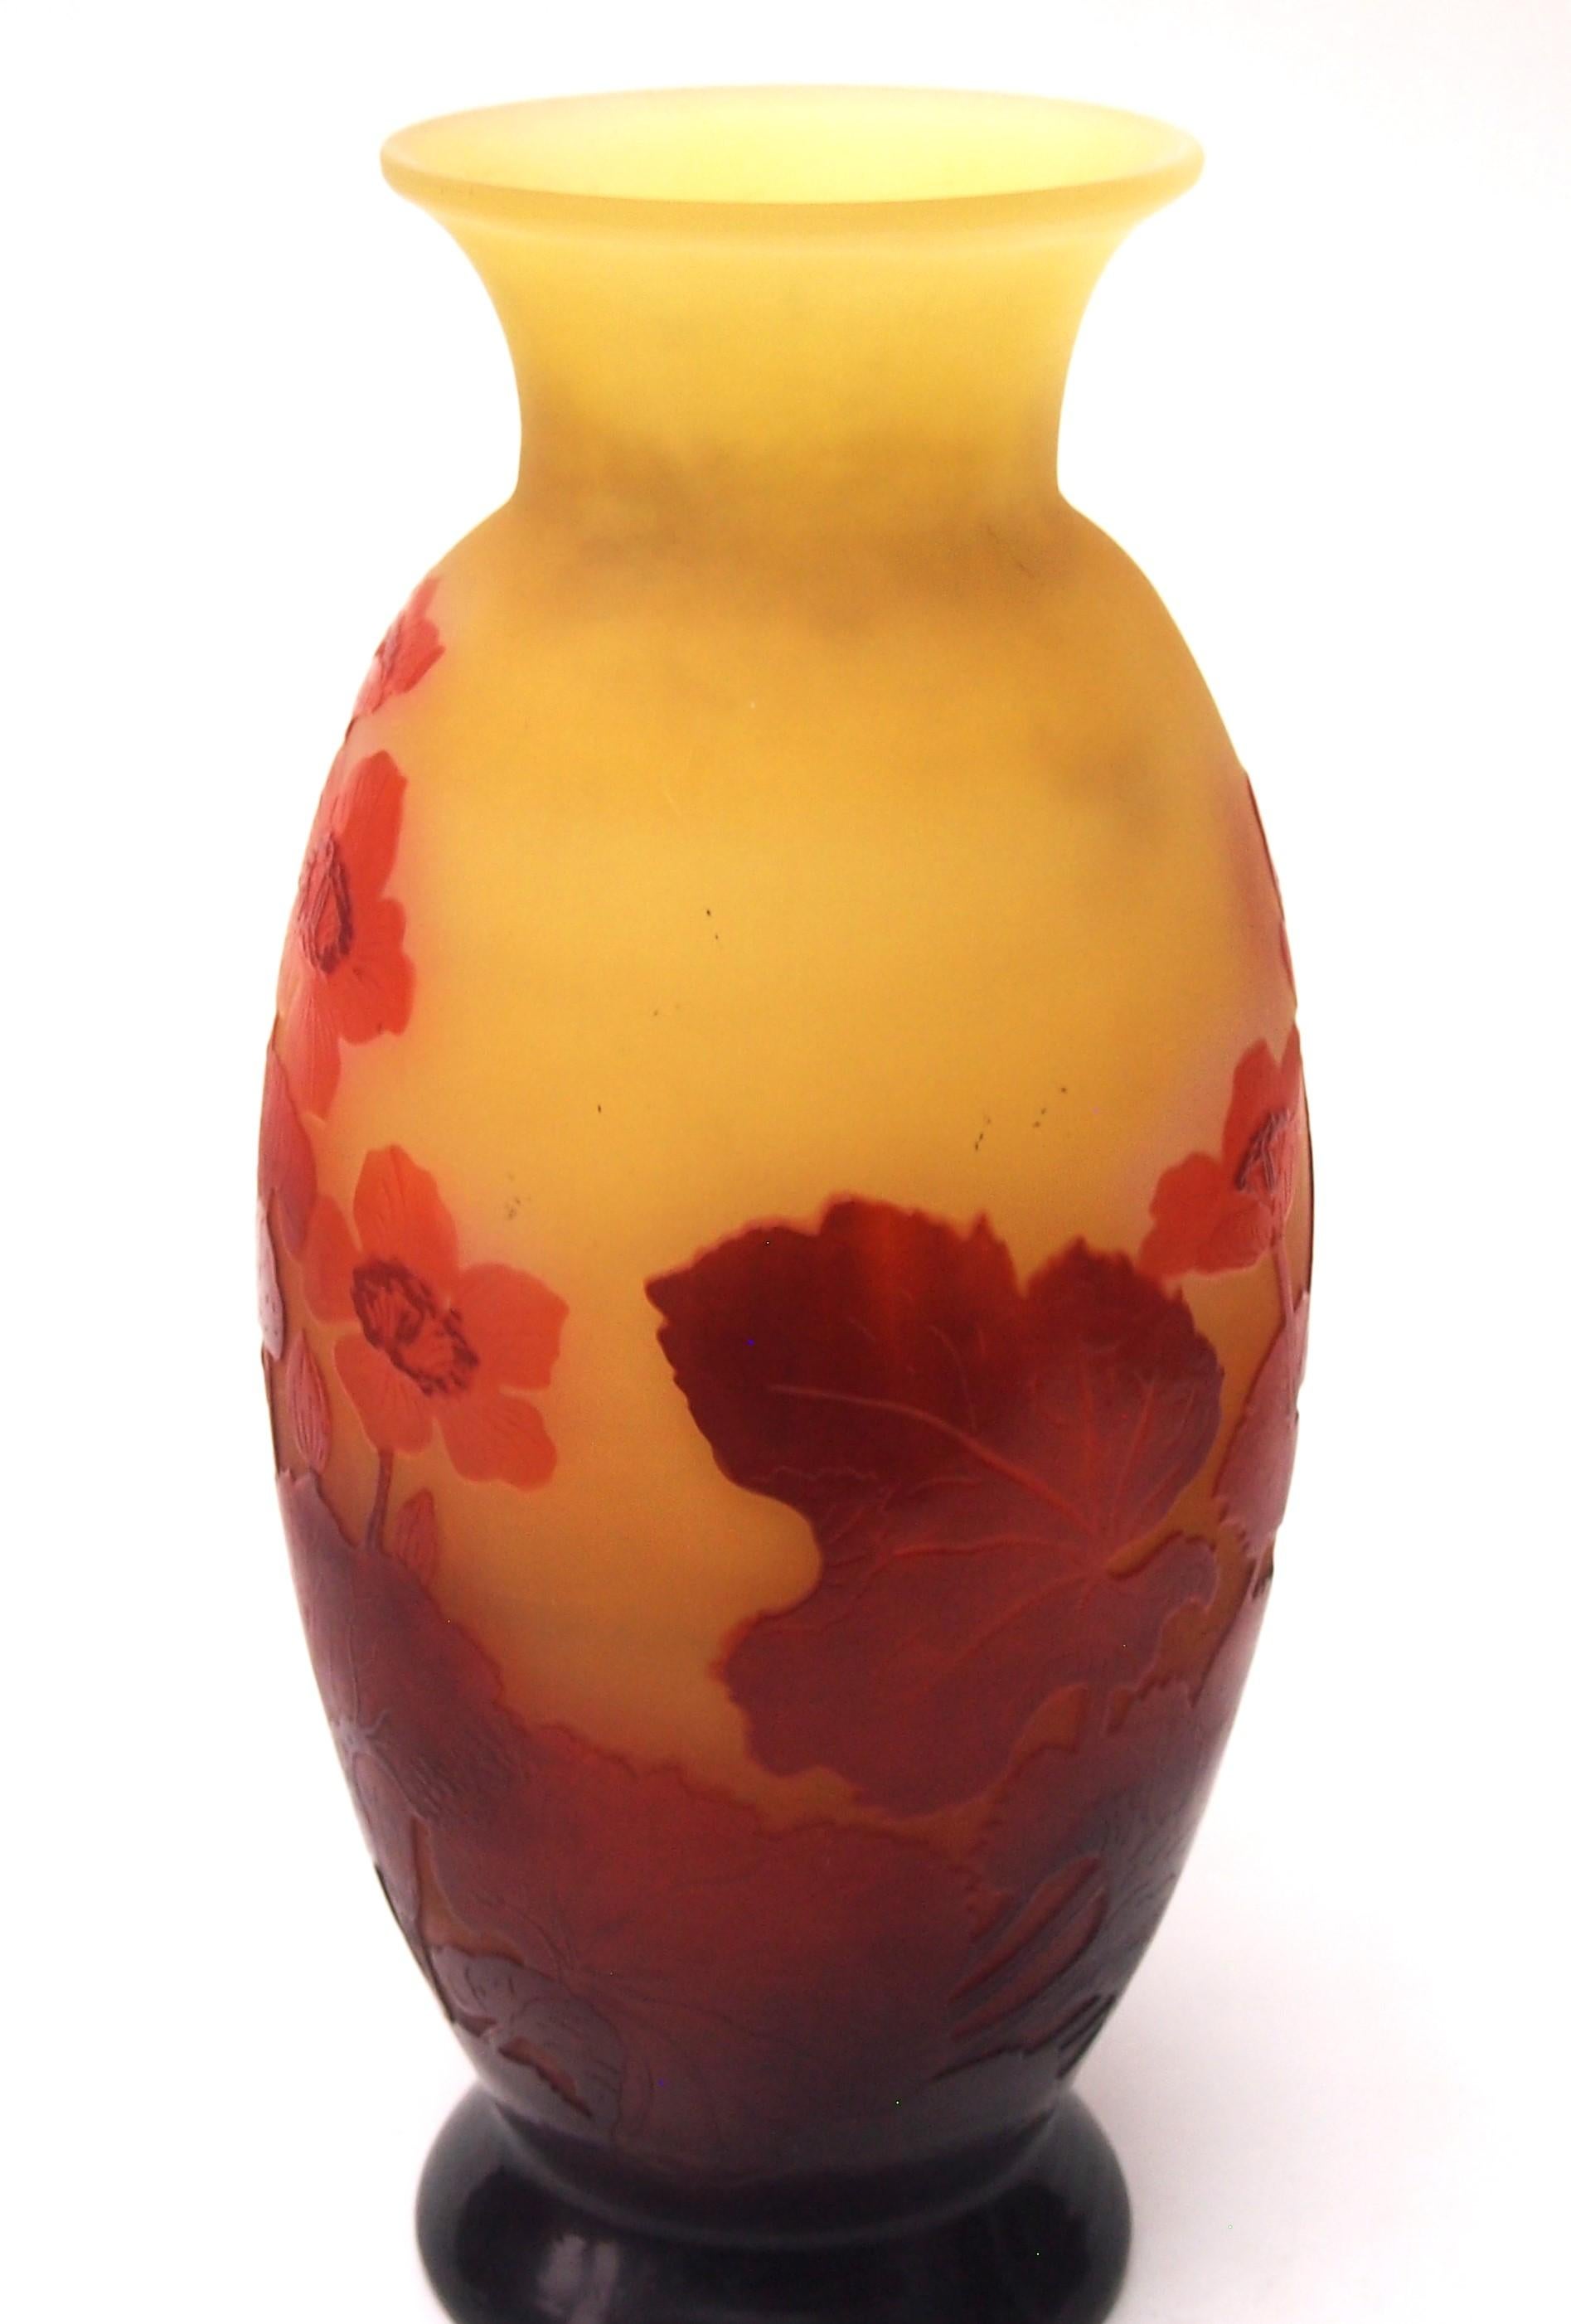 French Art Nouveau Emile Gallé cameo vase depicting multiple Flowering Anemones in Reds over orange-yellow, with fine internal polishing to highlight the red in the flowers -A good size and shape - where the internal polishing has not been done the